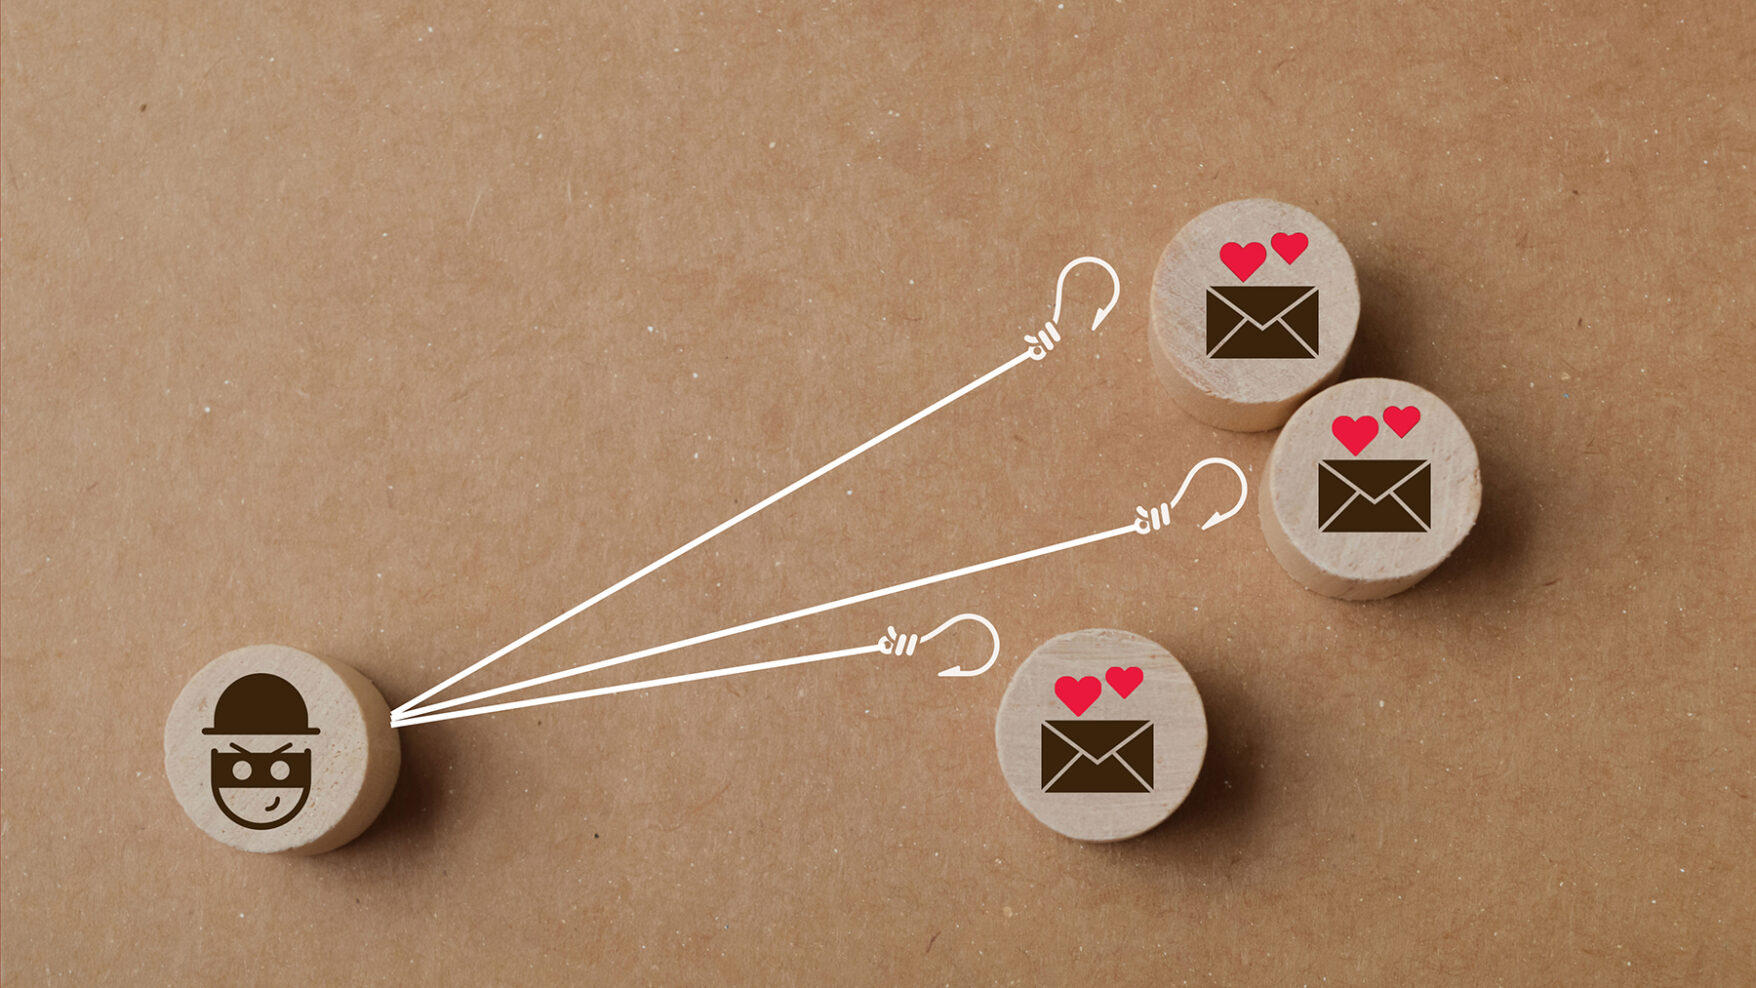 Three wooden pegs are clustered on the right, each with an envelope symbols and hearts over them. On the left is a wooden peg with a burglar symbol on it. Lines with hooks reach out to the envelopes. Meant to convey the danger of online romances when you don't have a clear idea of the identity of the person romancing you.